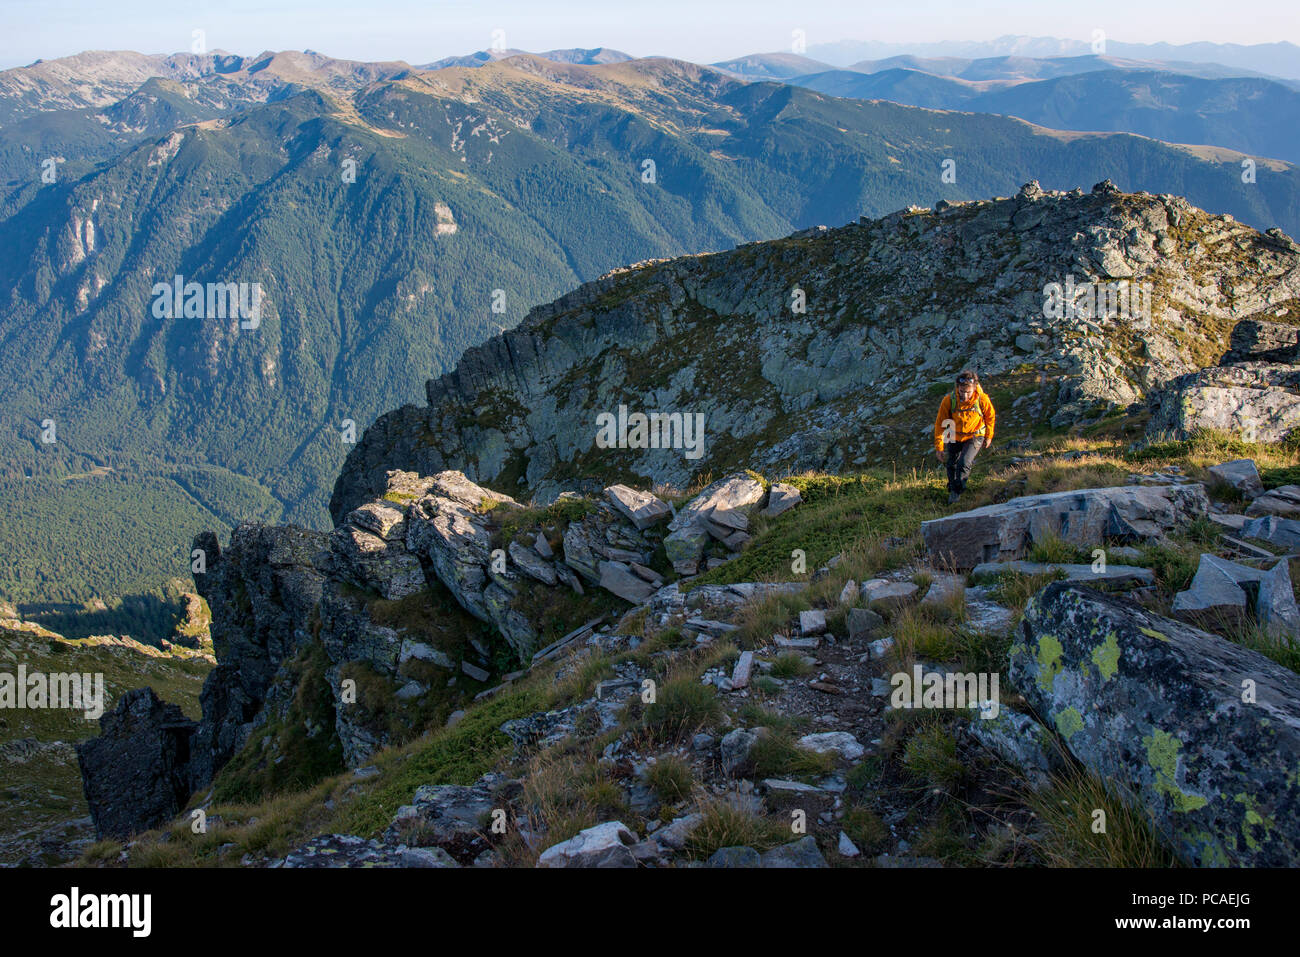 A hiker climbs along a high ridge near Maliovitsa in the Rila Mountains with distant views of valleys and hills, Bulgaria, Europe Stock Photo